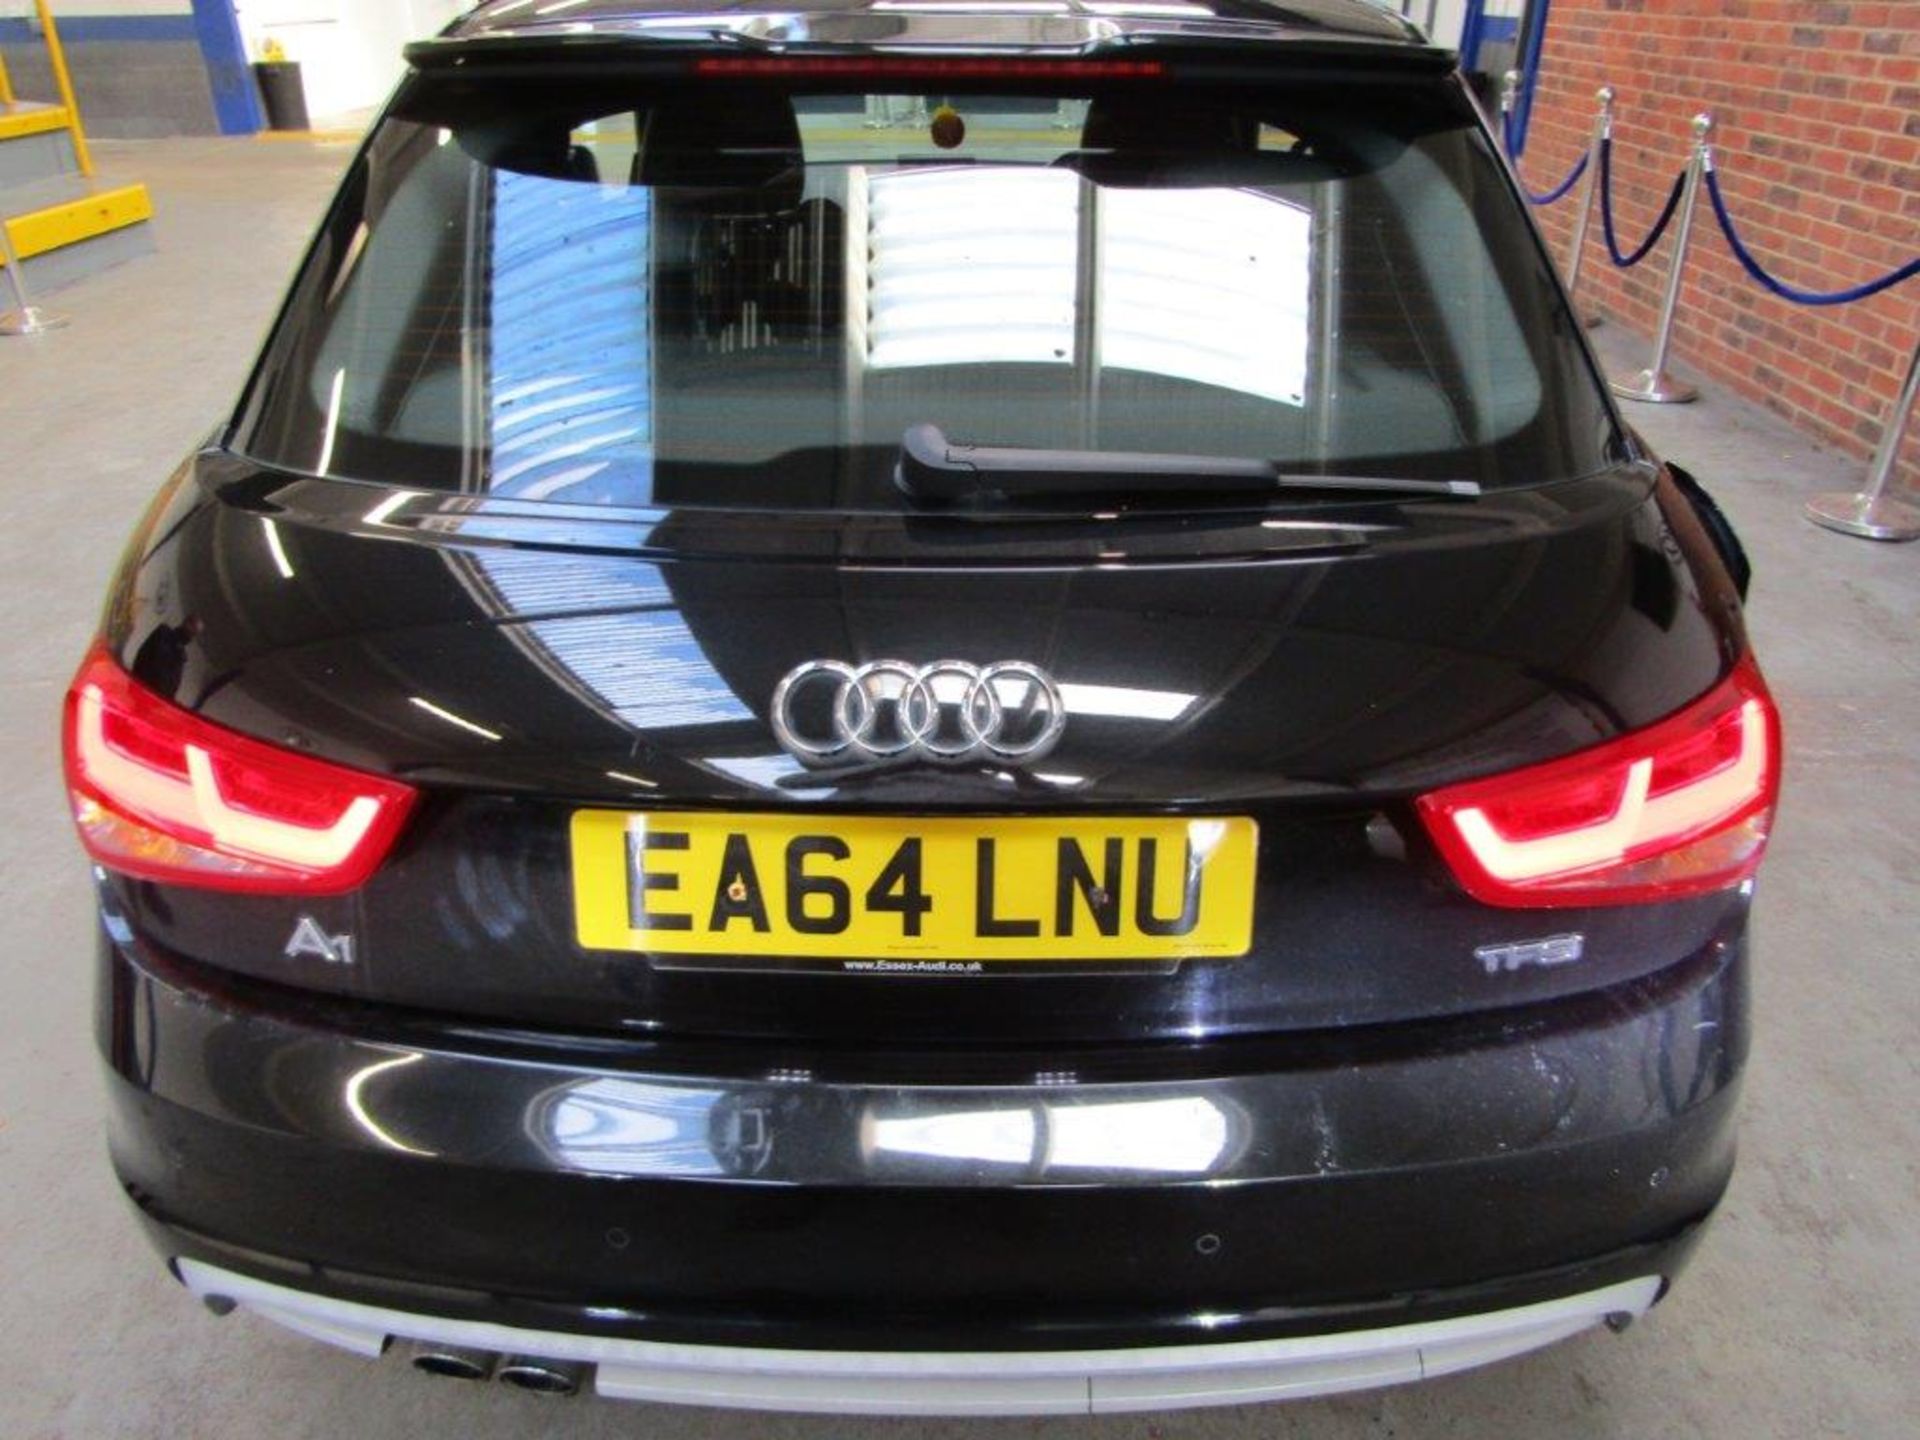 64 14 Audi A1 S Line Style - Image 8 of 18